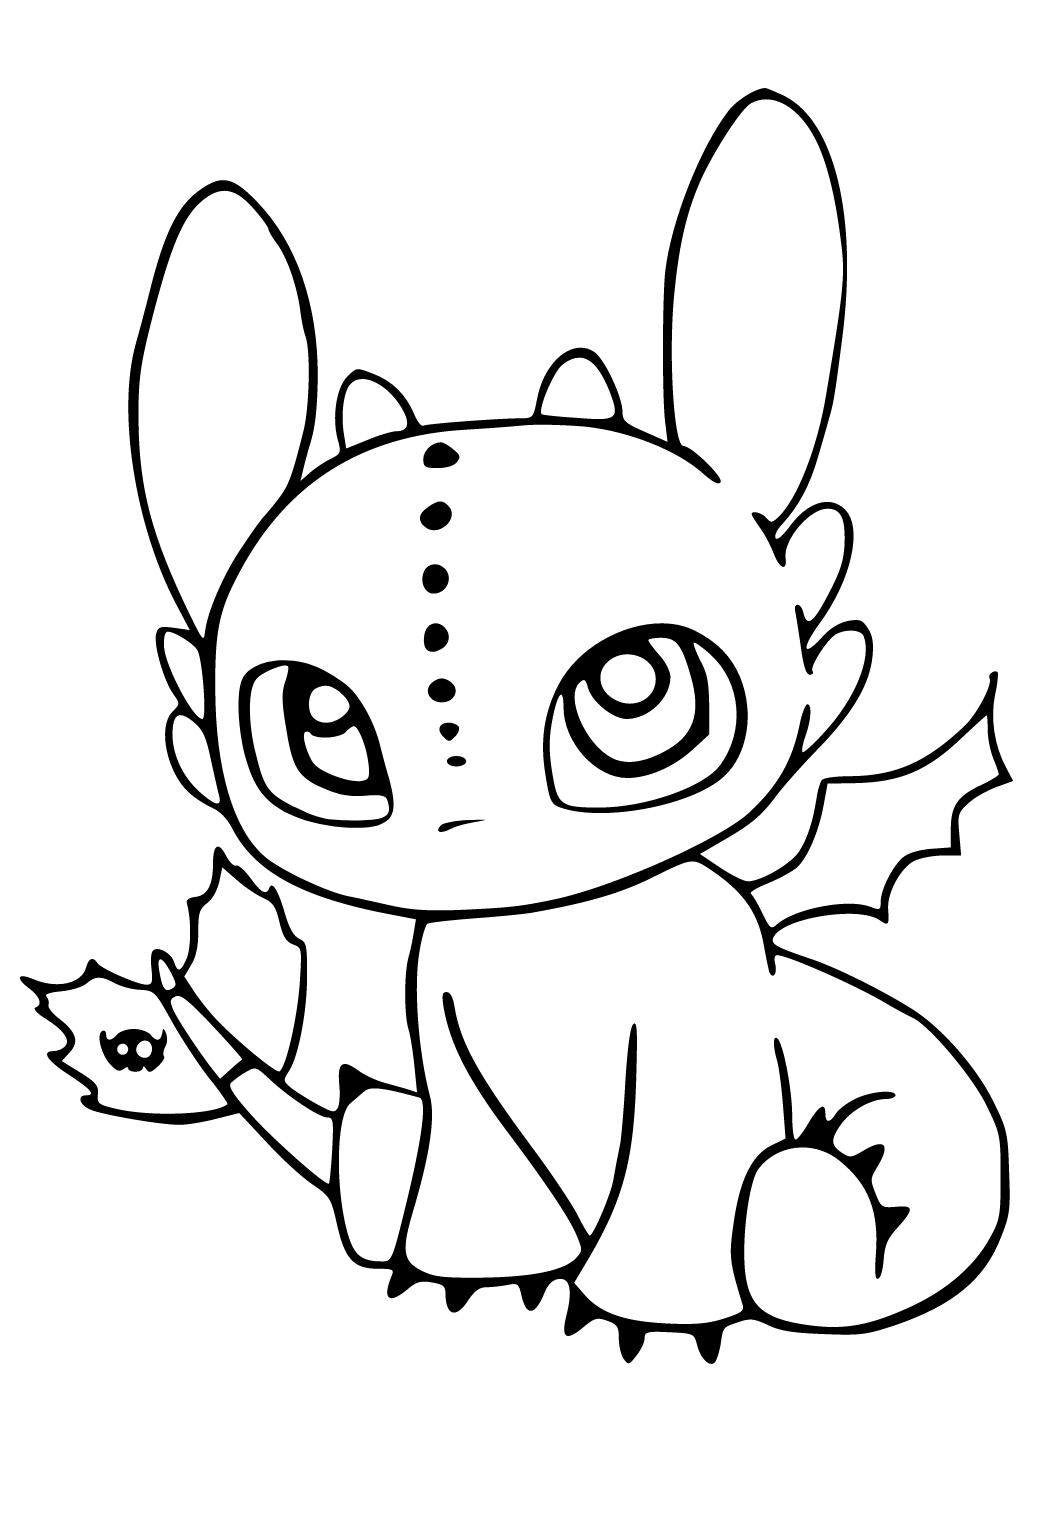 Stitch And Baby Yoda Coloring Pages | edu.svet.gob.gt